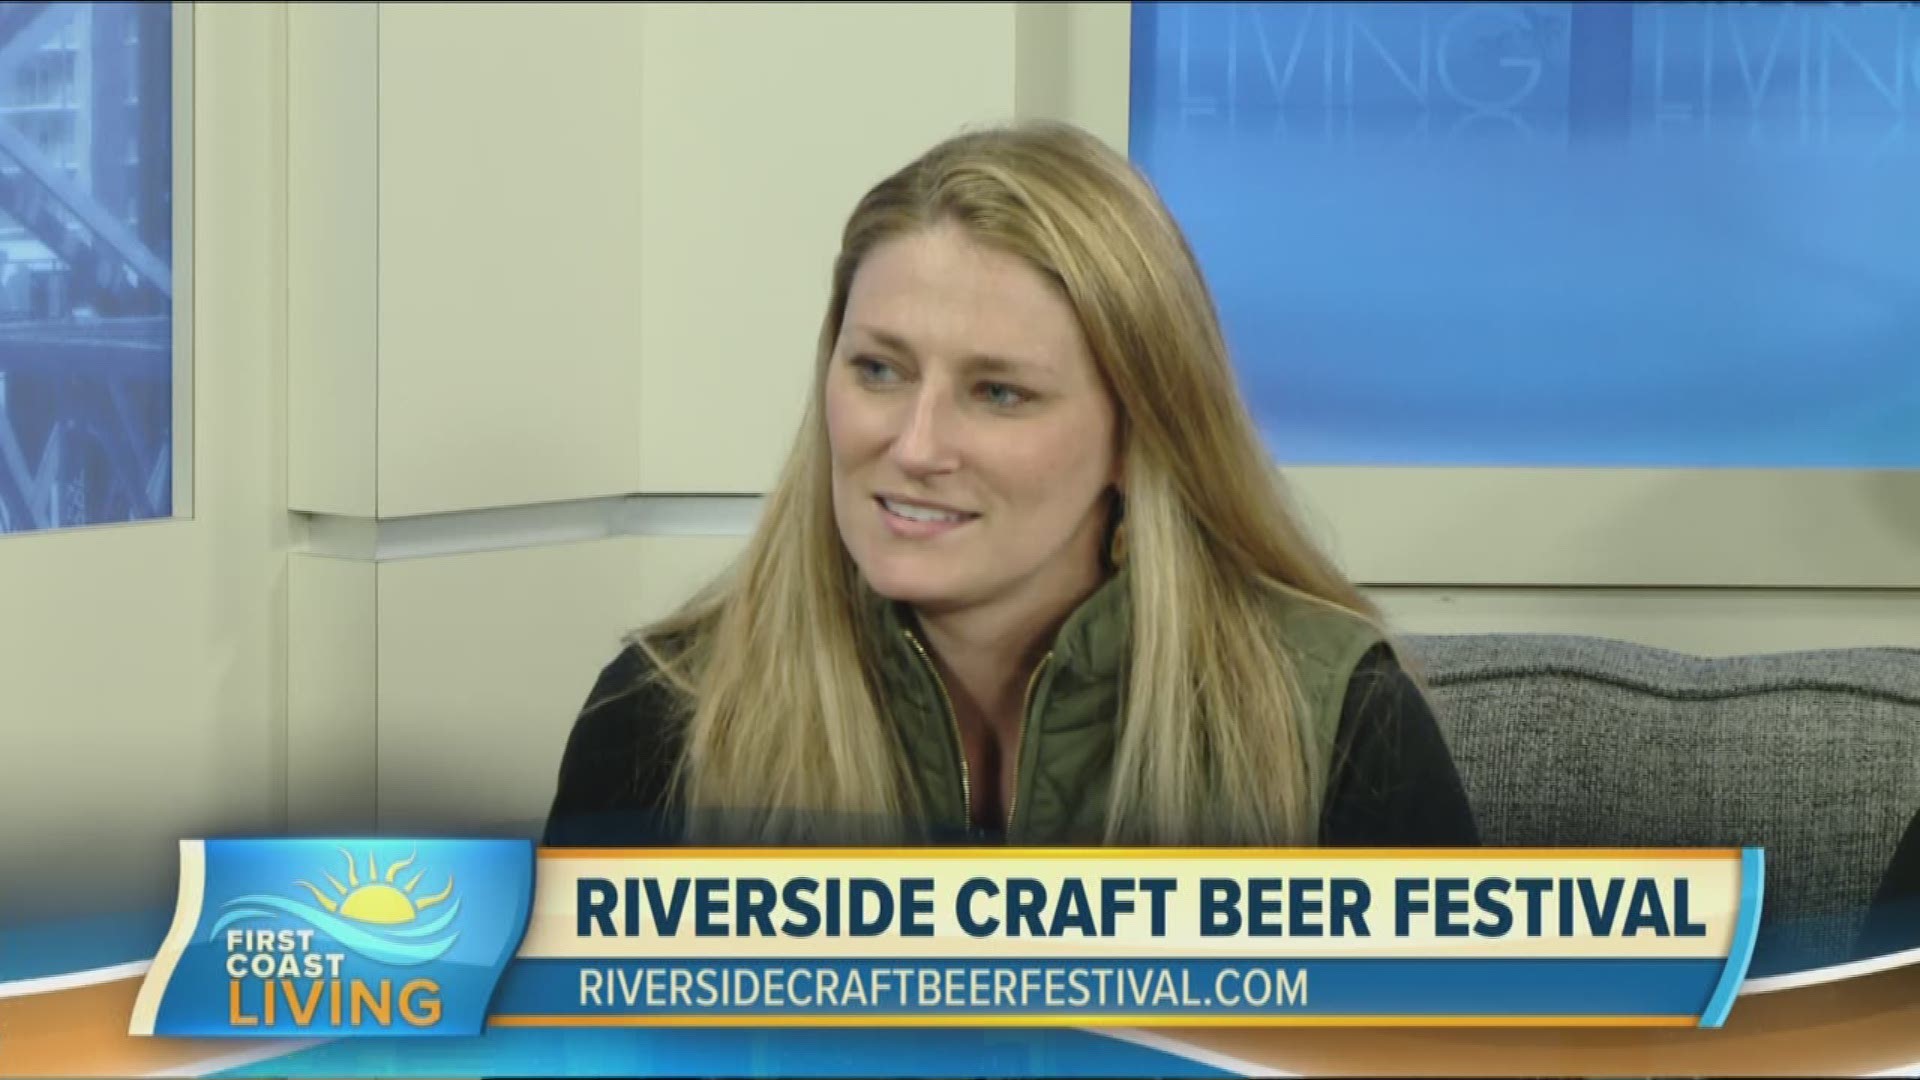 The 7th annual Riverside Craft Beer Festival is kicking off in Jacksonville.